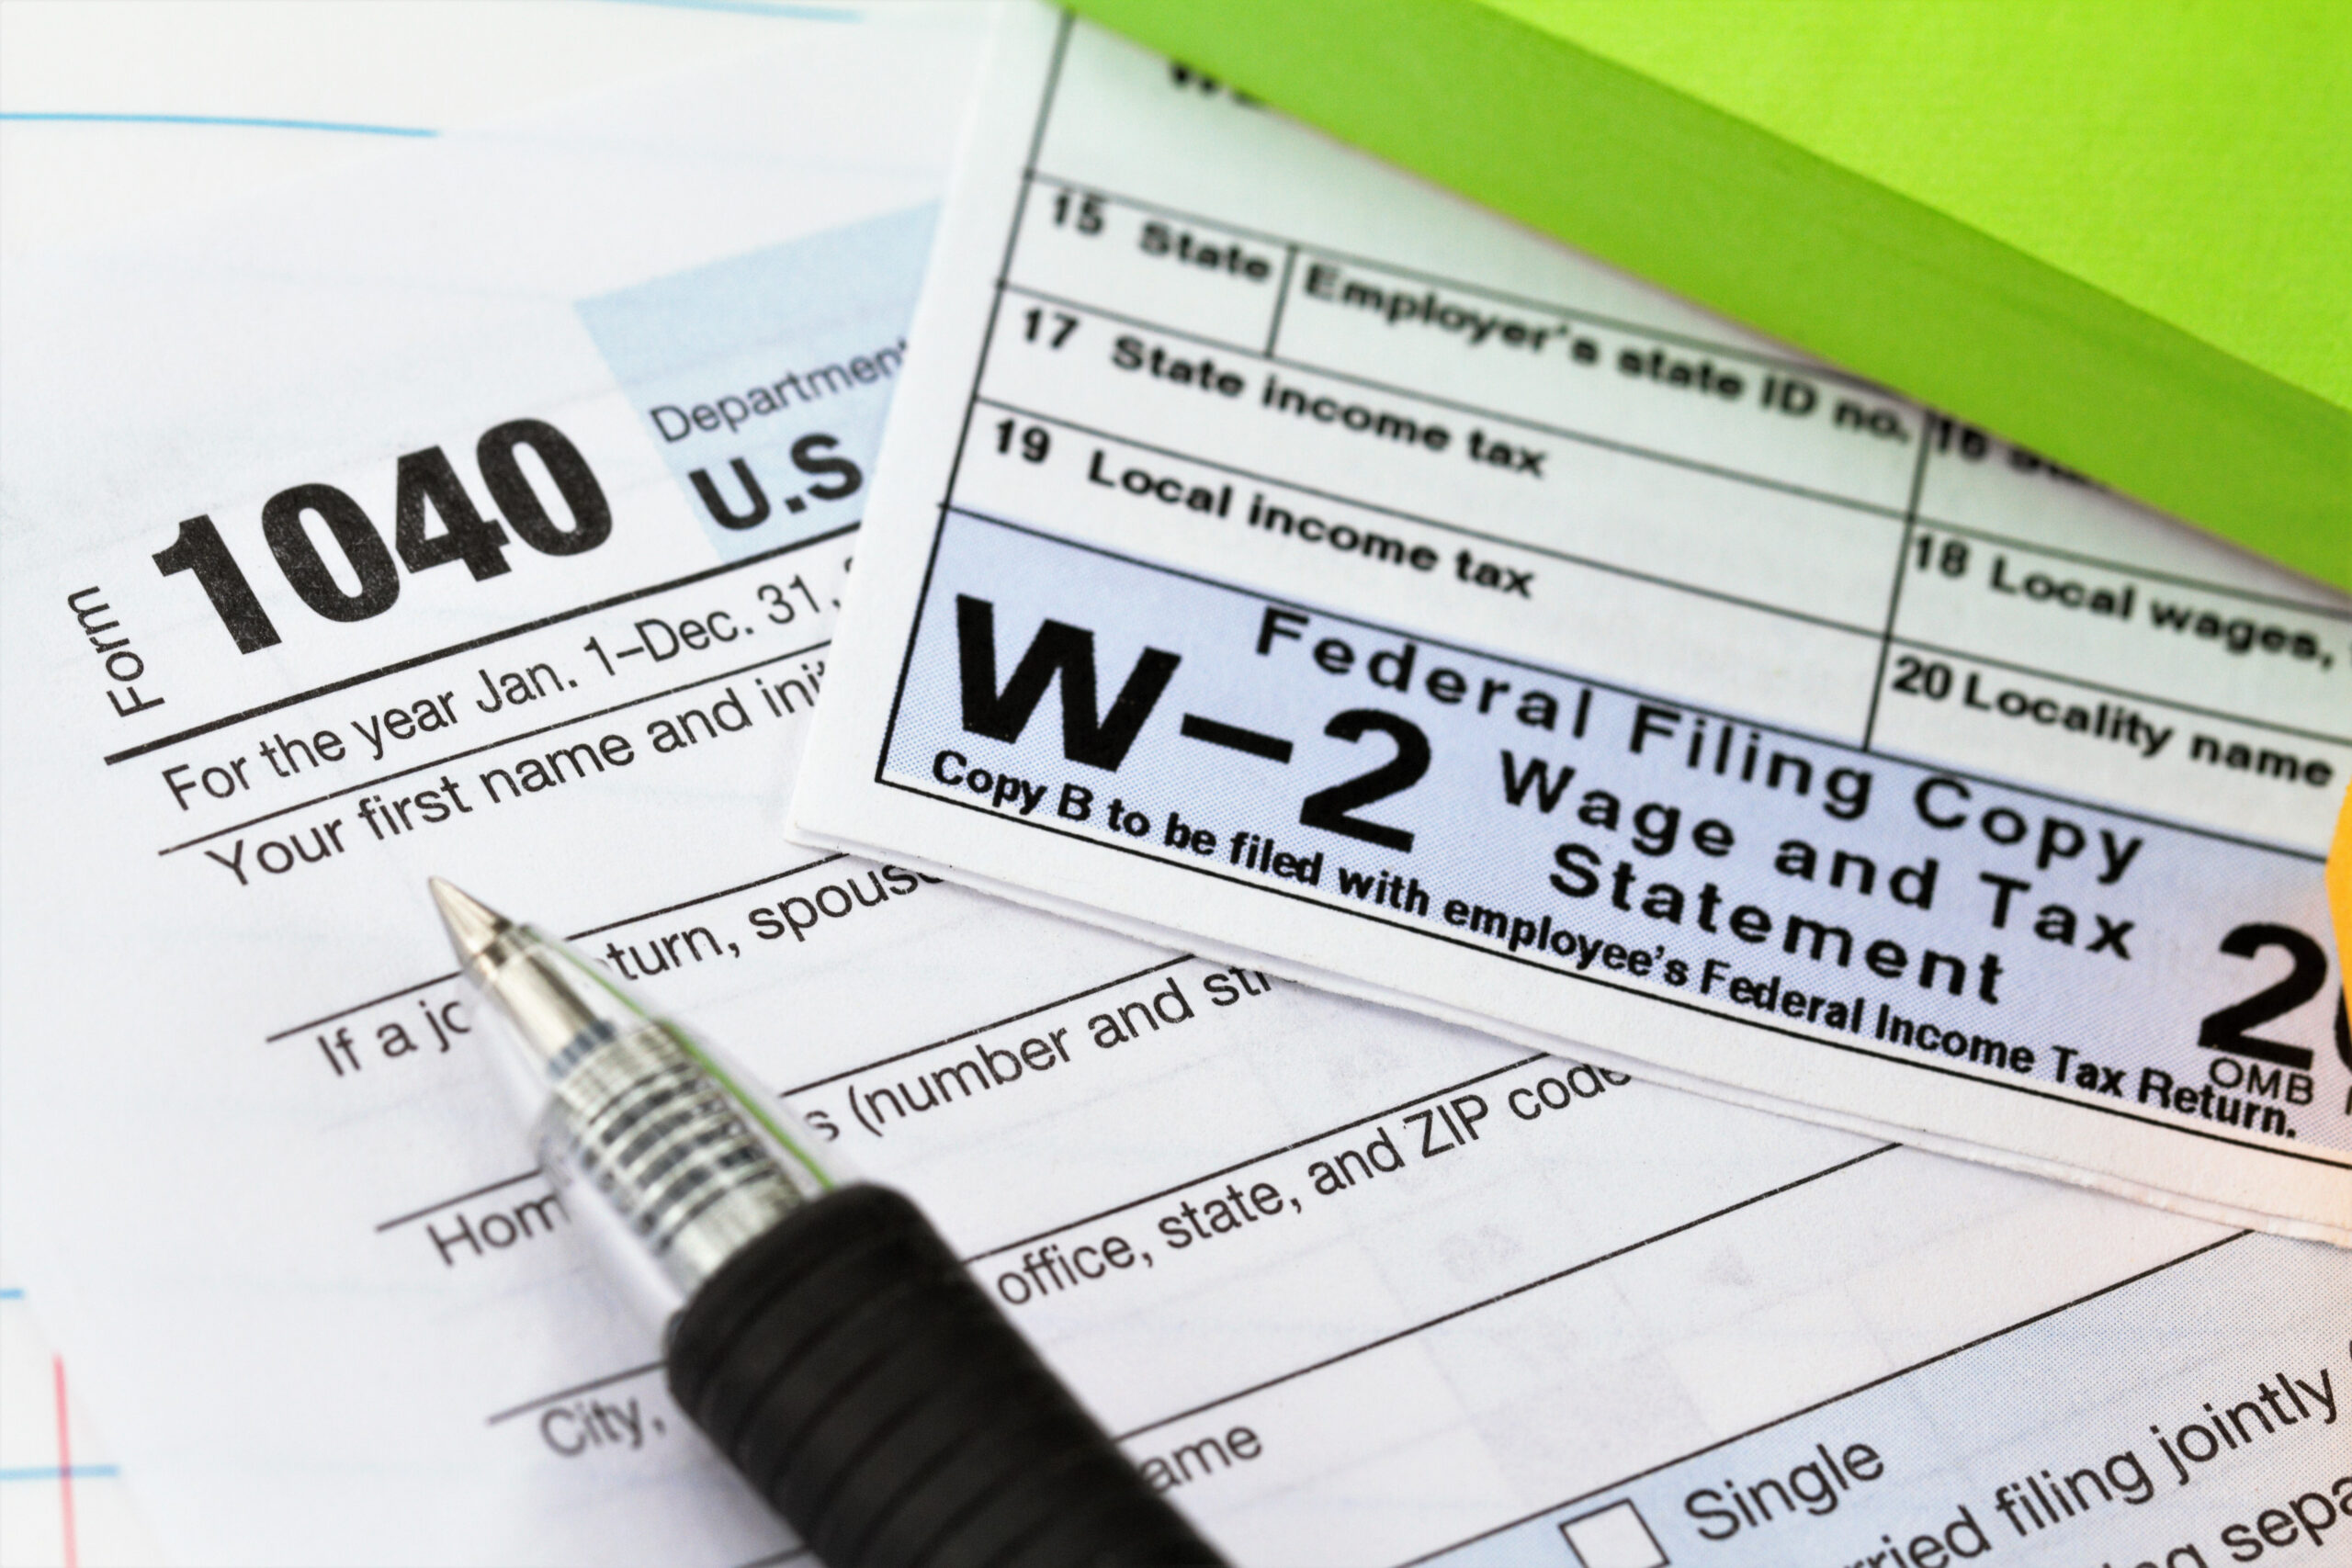 How To Change Your Address On W-2 Forms | Sapling within W2 Form Address Change